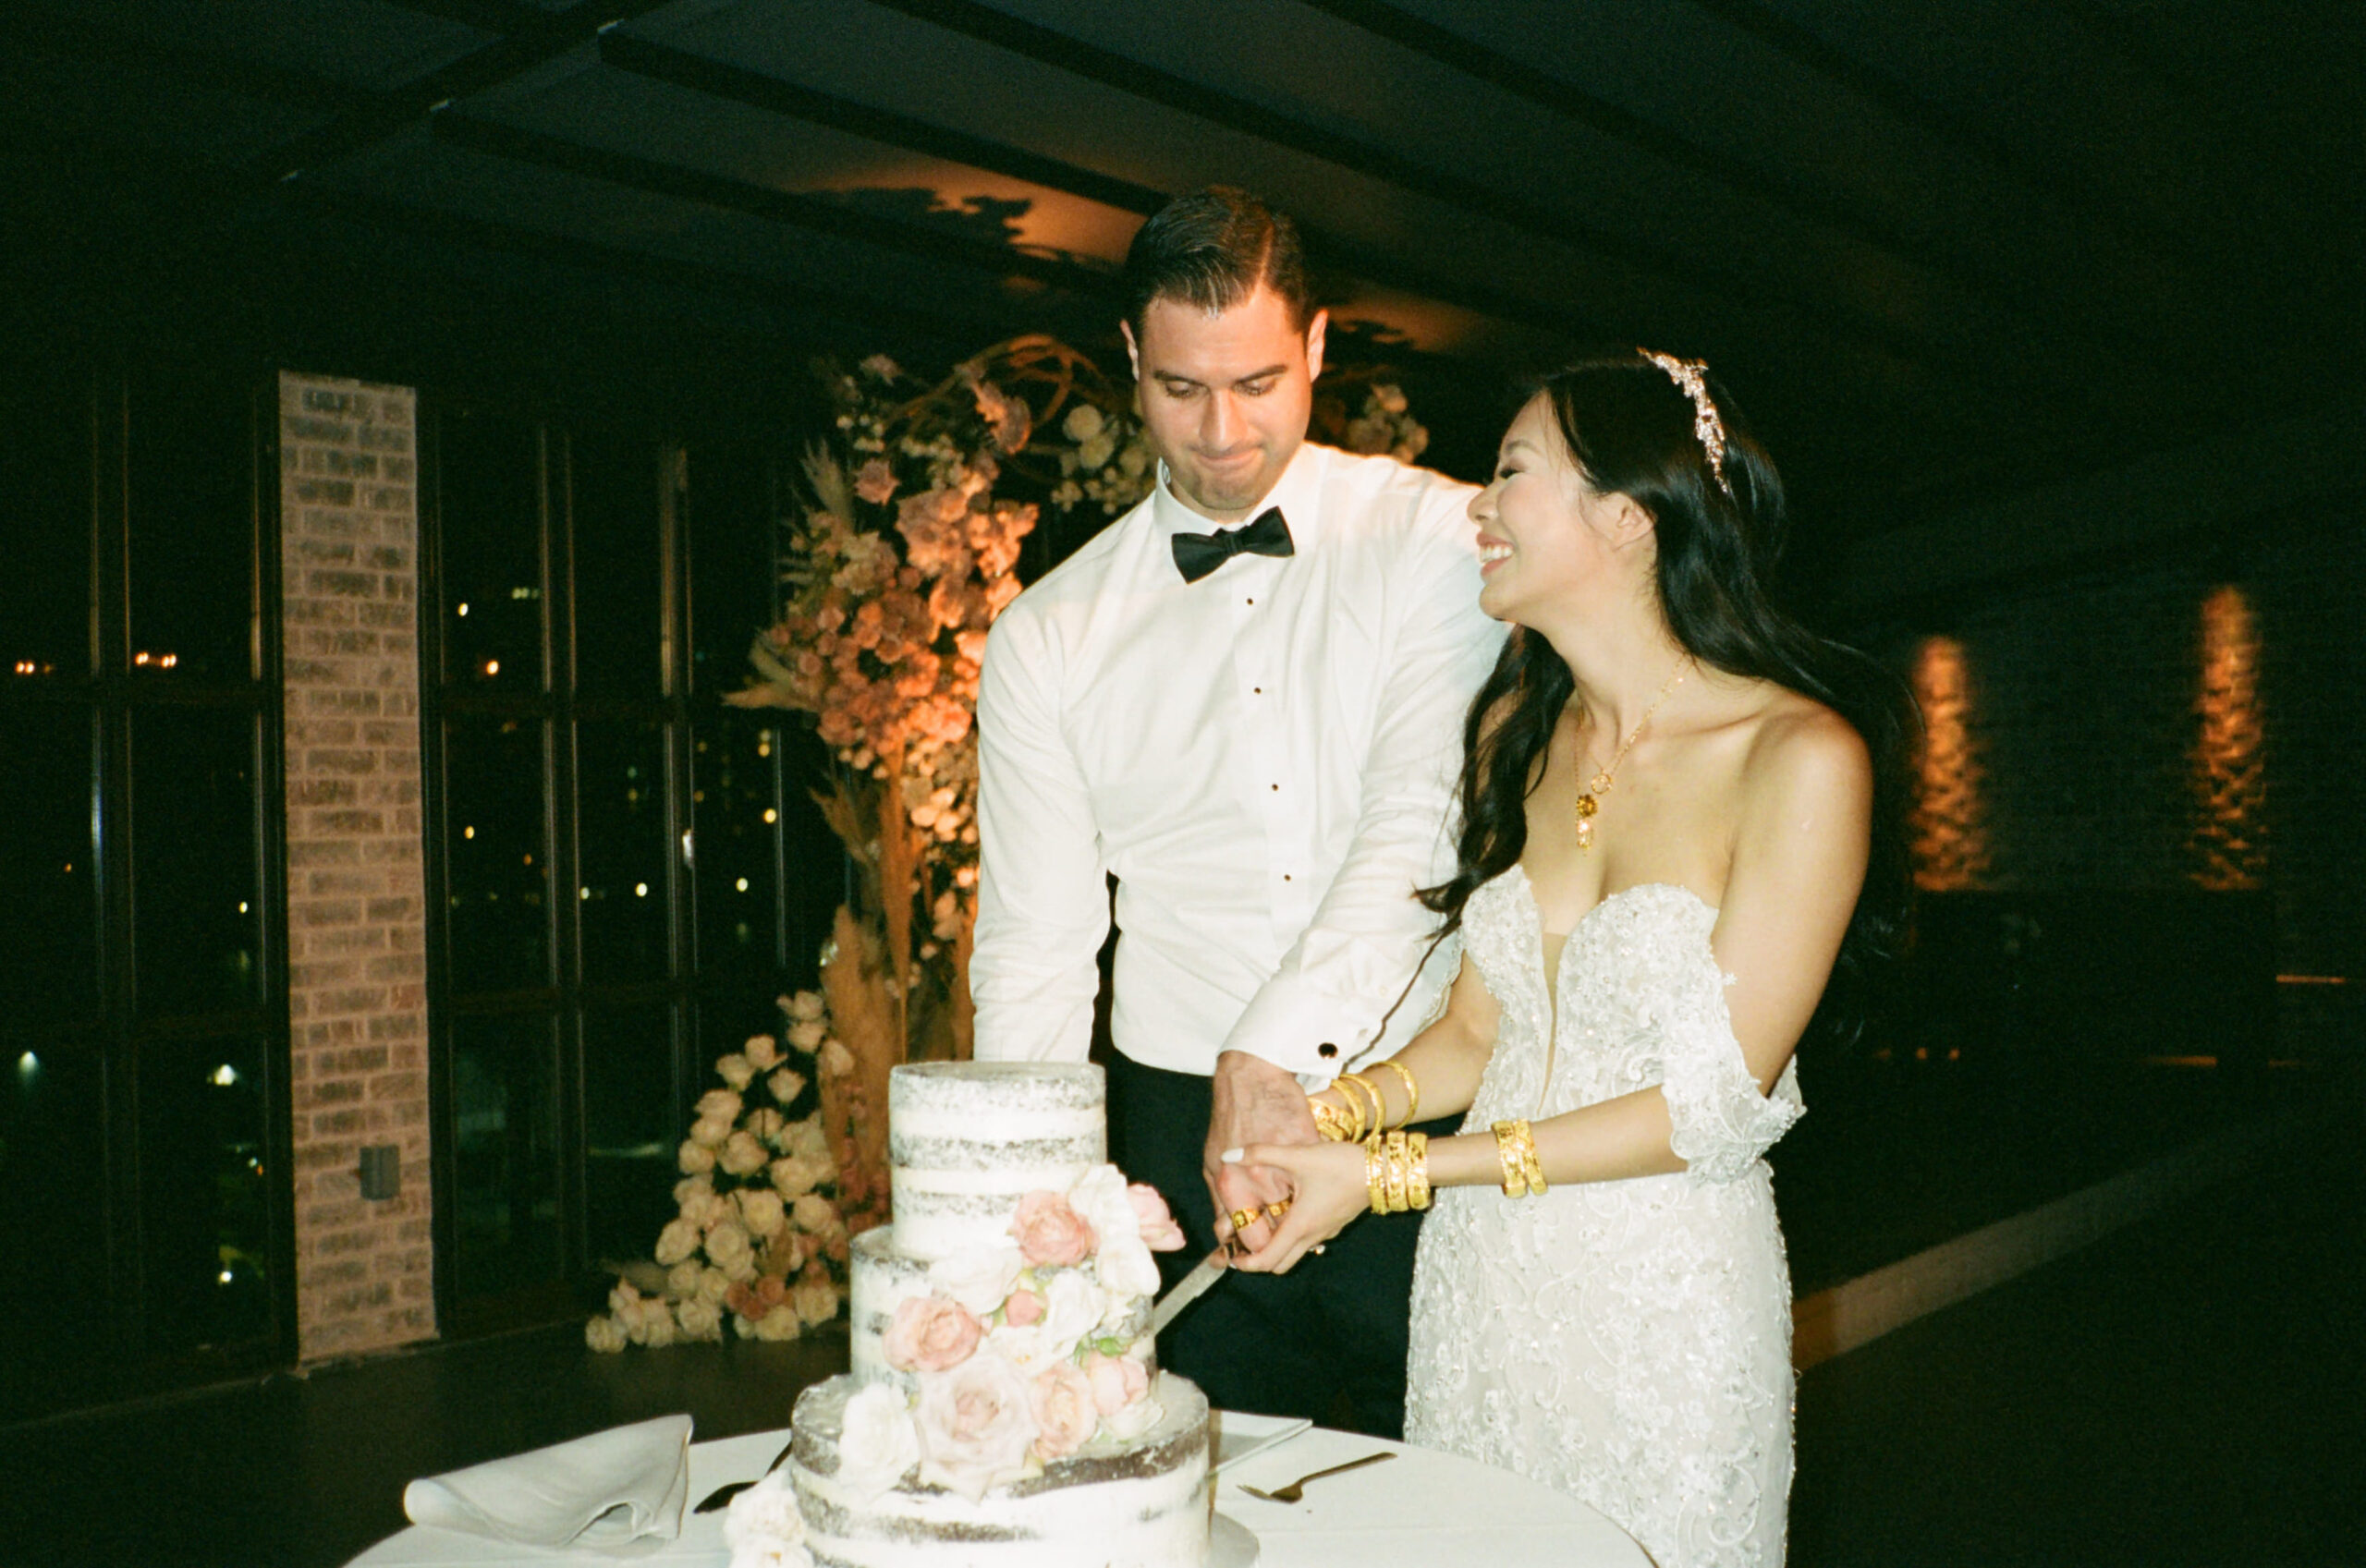 Editorial photo of the cake-cutting ceremony in NYC. Image by Jenny Fu Studio